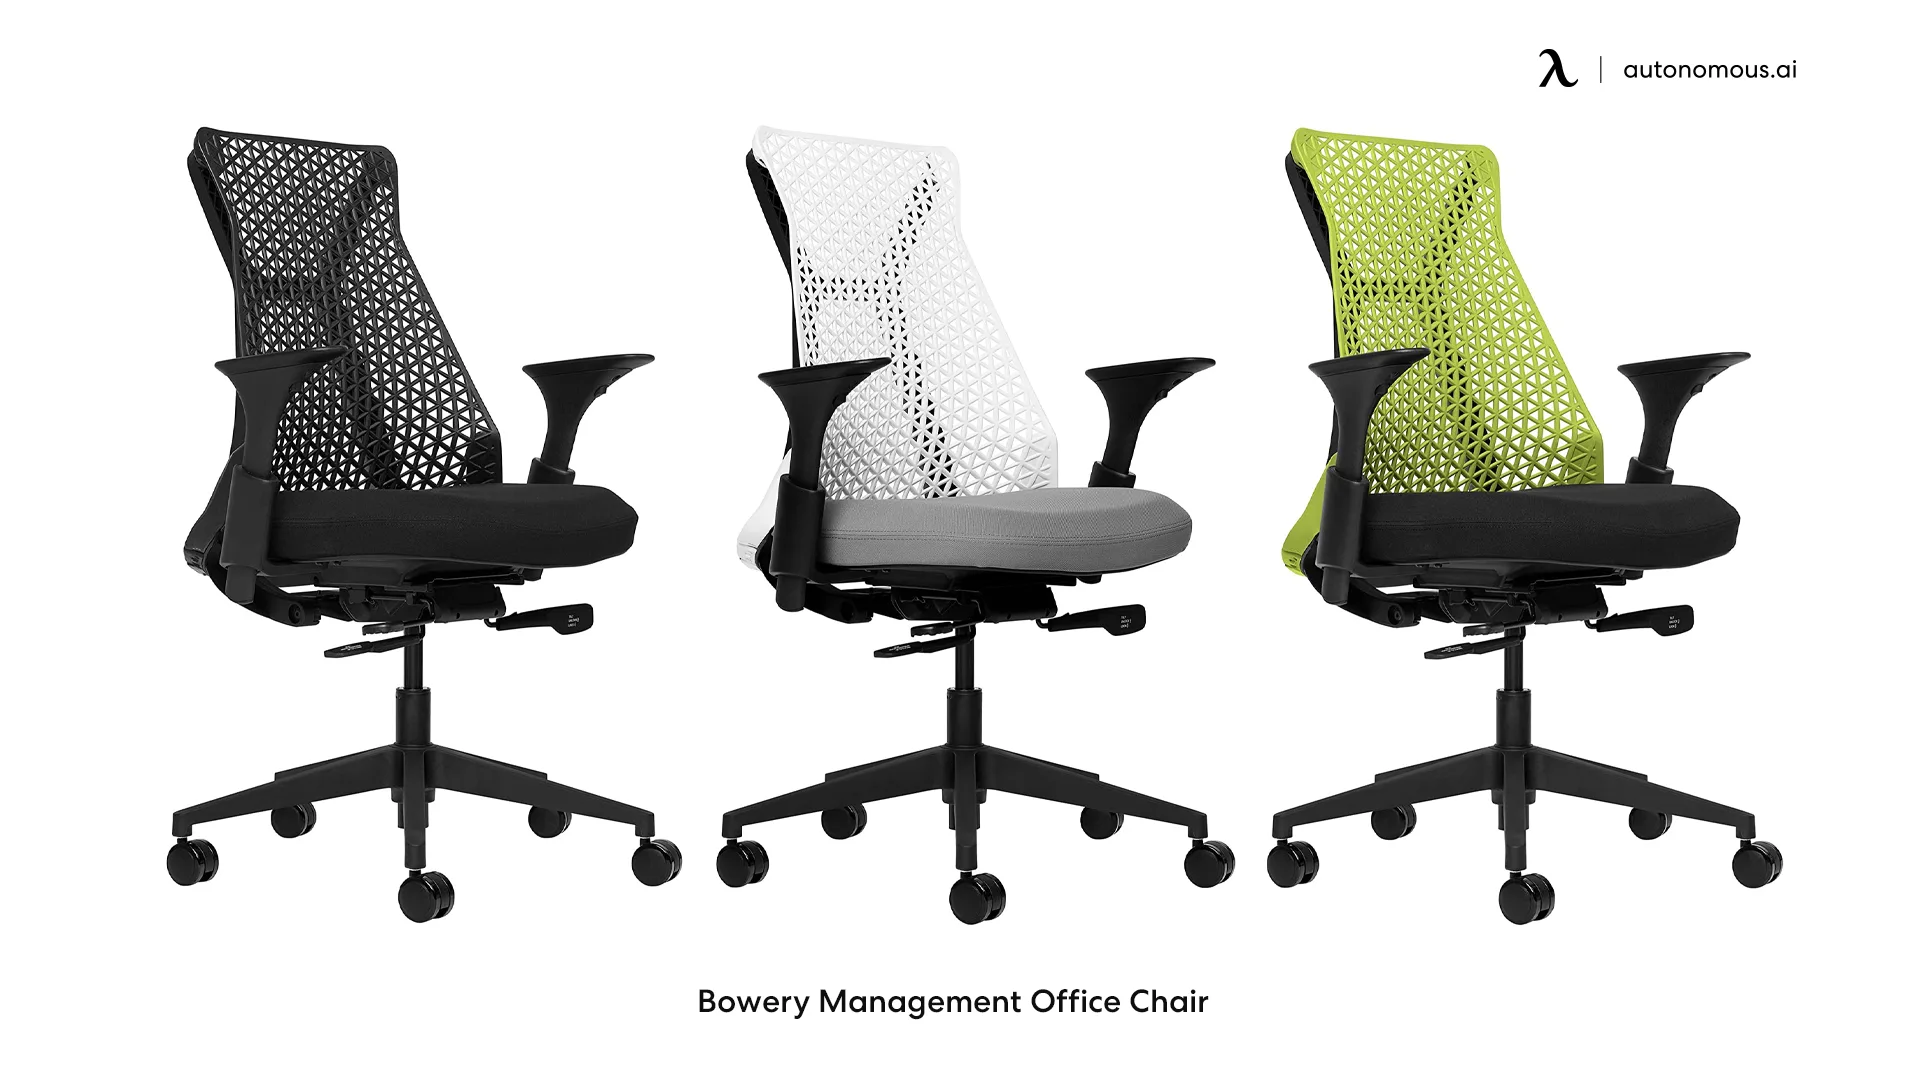 Bowery Management Office Chair